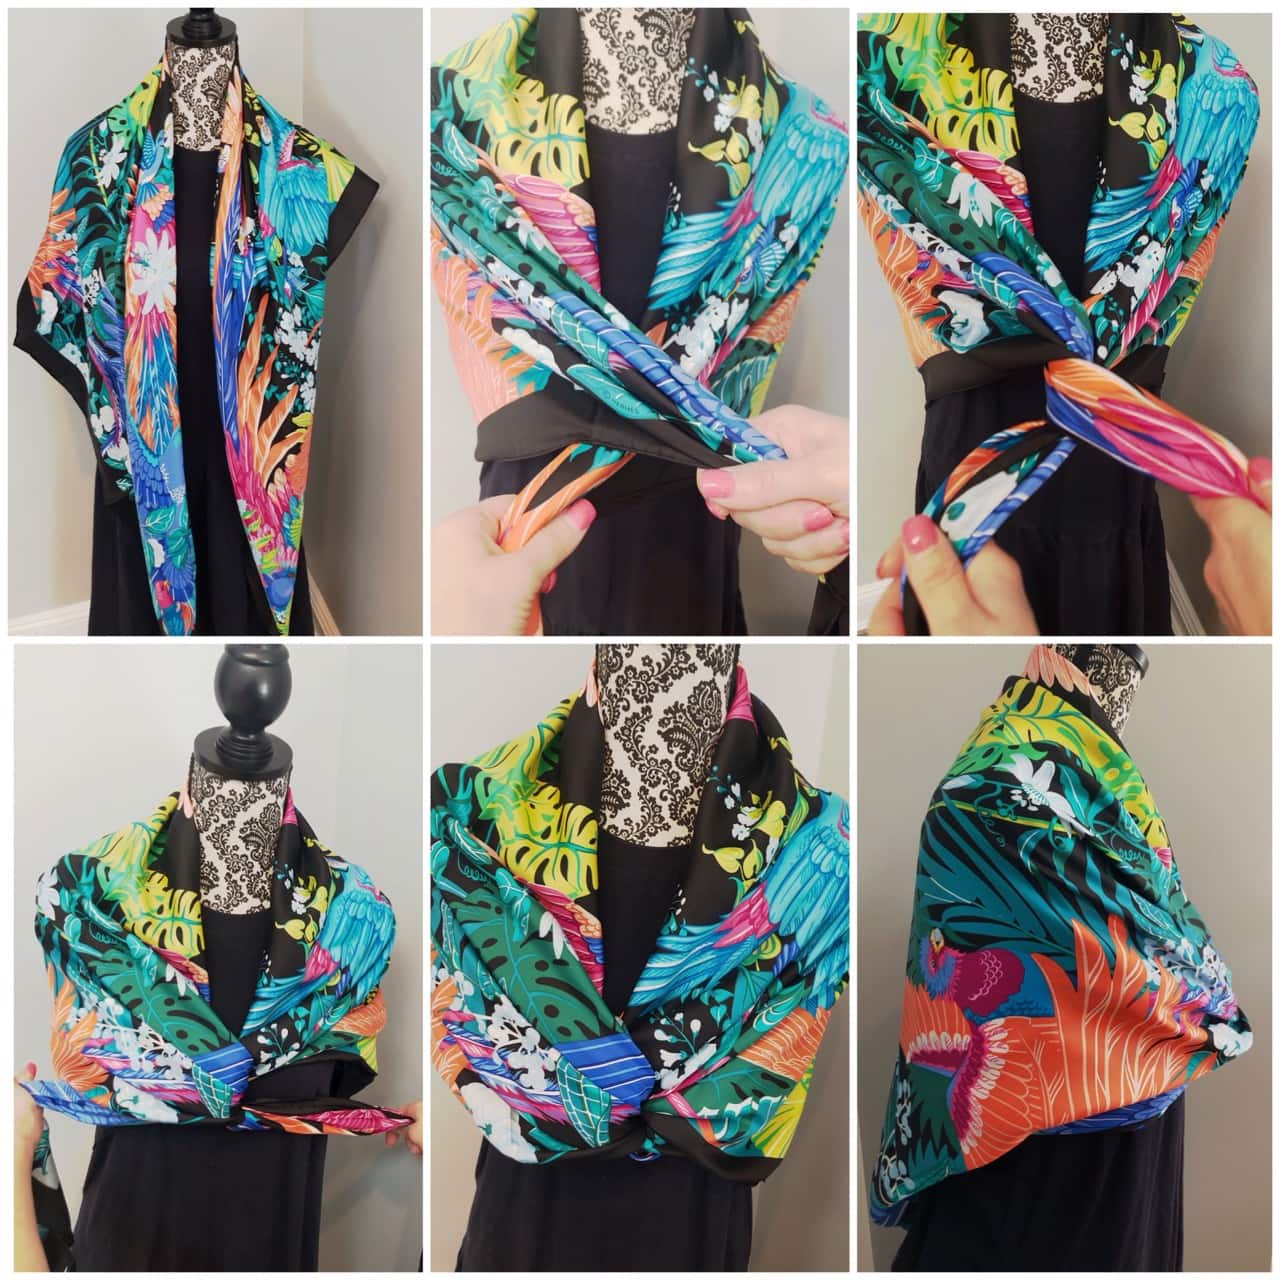 How to Tie a Hermes Scarf 4 ways - Later Ever After, BlogLater Ever After –  A Chicago Based Life, Style and Fashion Blog